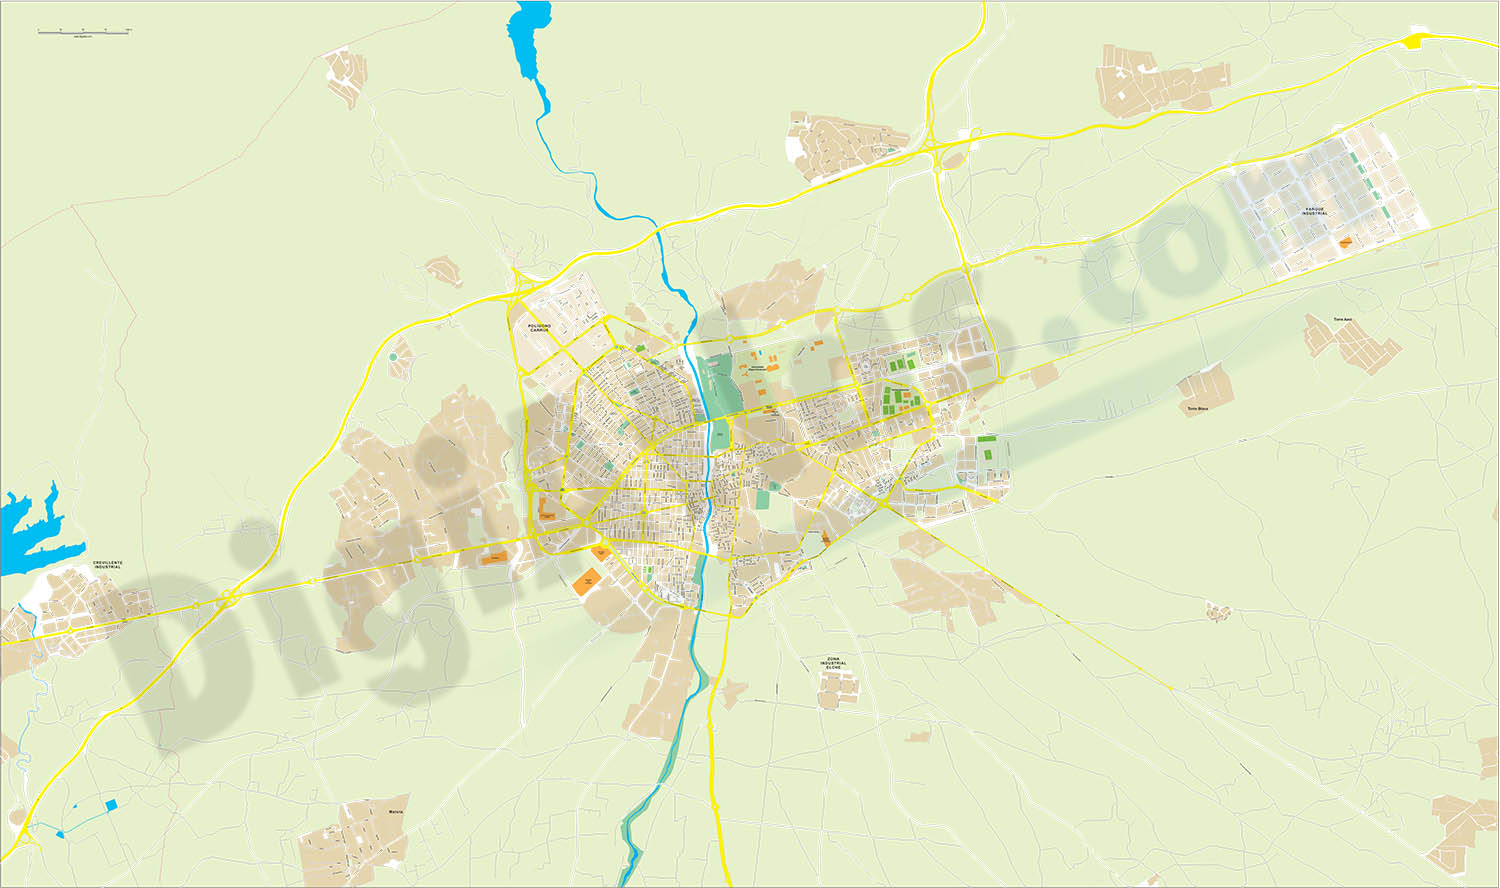 Elche-elx - city map and Industrial Estate 